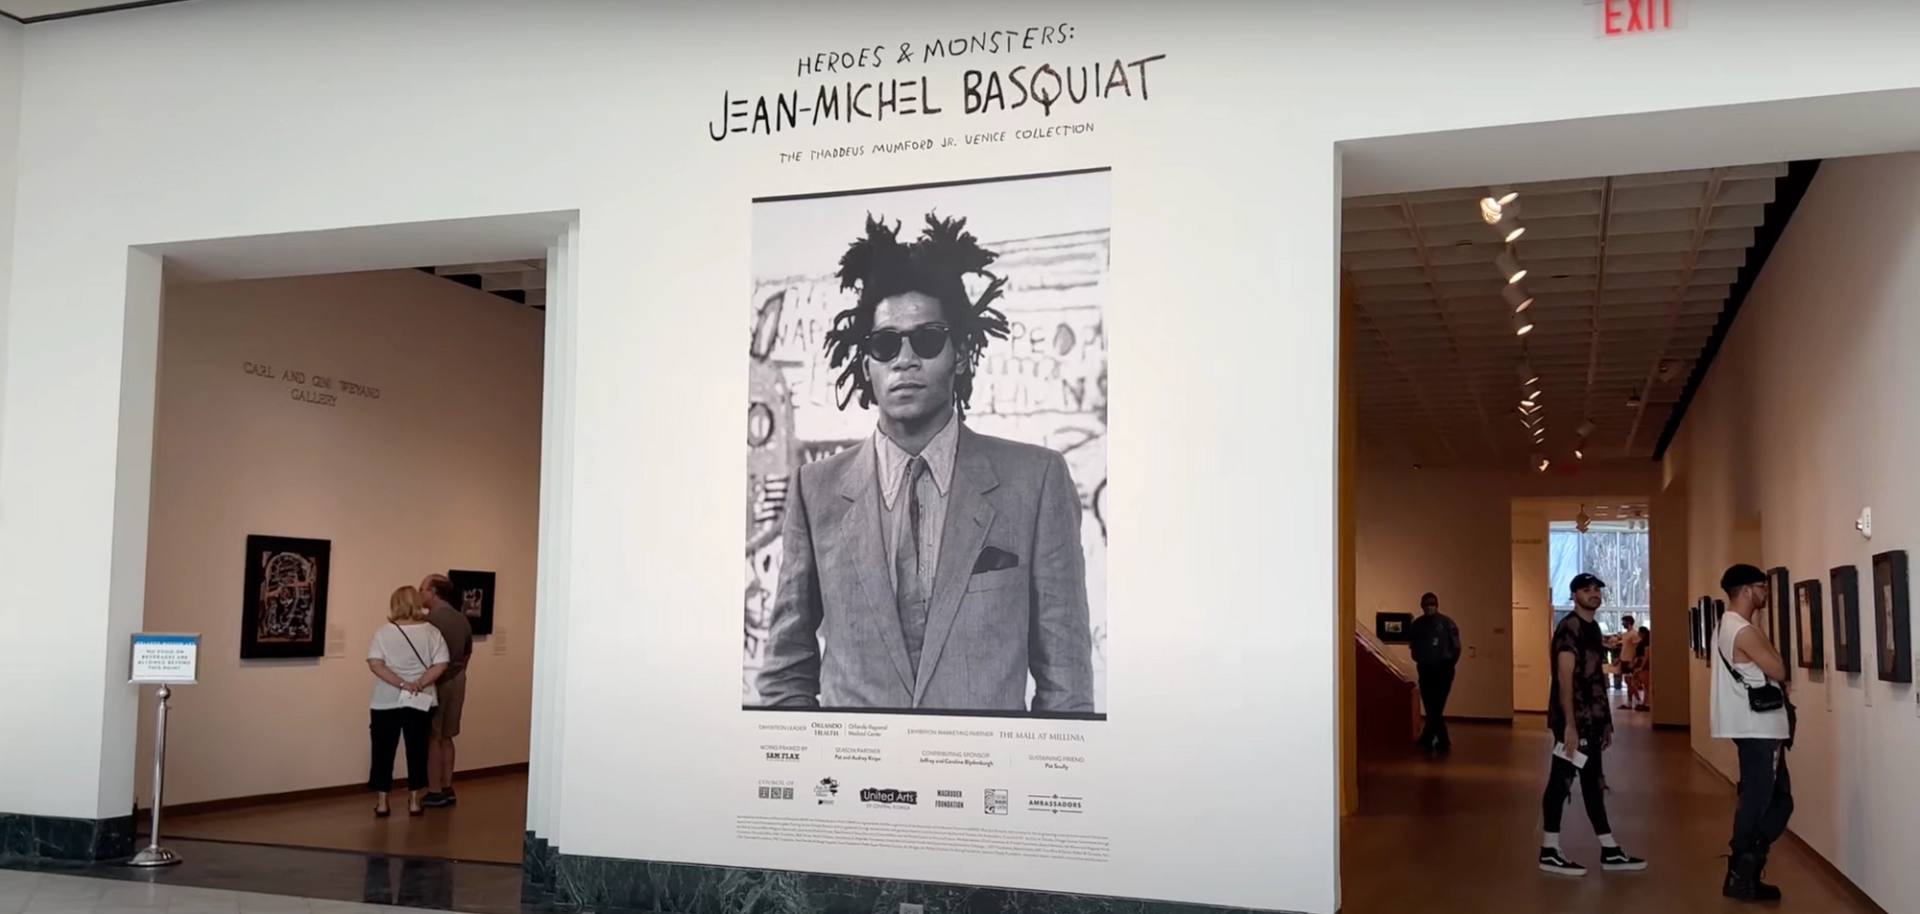 A screenshot of a Youtube video showing the installation view of Basquiat's Heroes and Monsters exhibit. It shows a larger-than-life black and white portrait of Basquiat, wearing a suit and sunglasses, against a white wall. On either side of the wall, visitors to the exhibition look at the artworks.